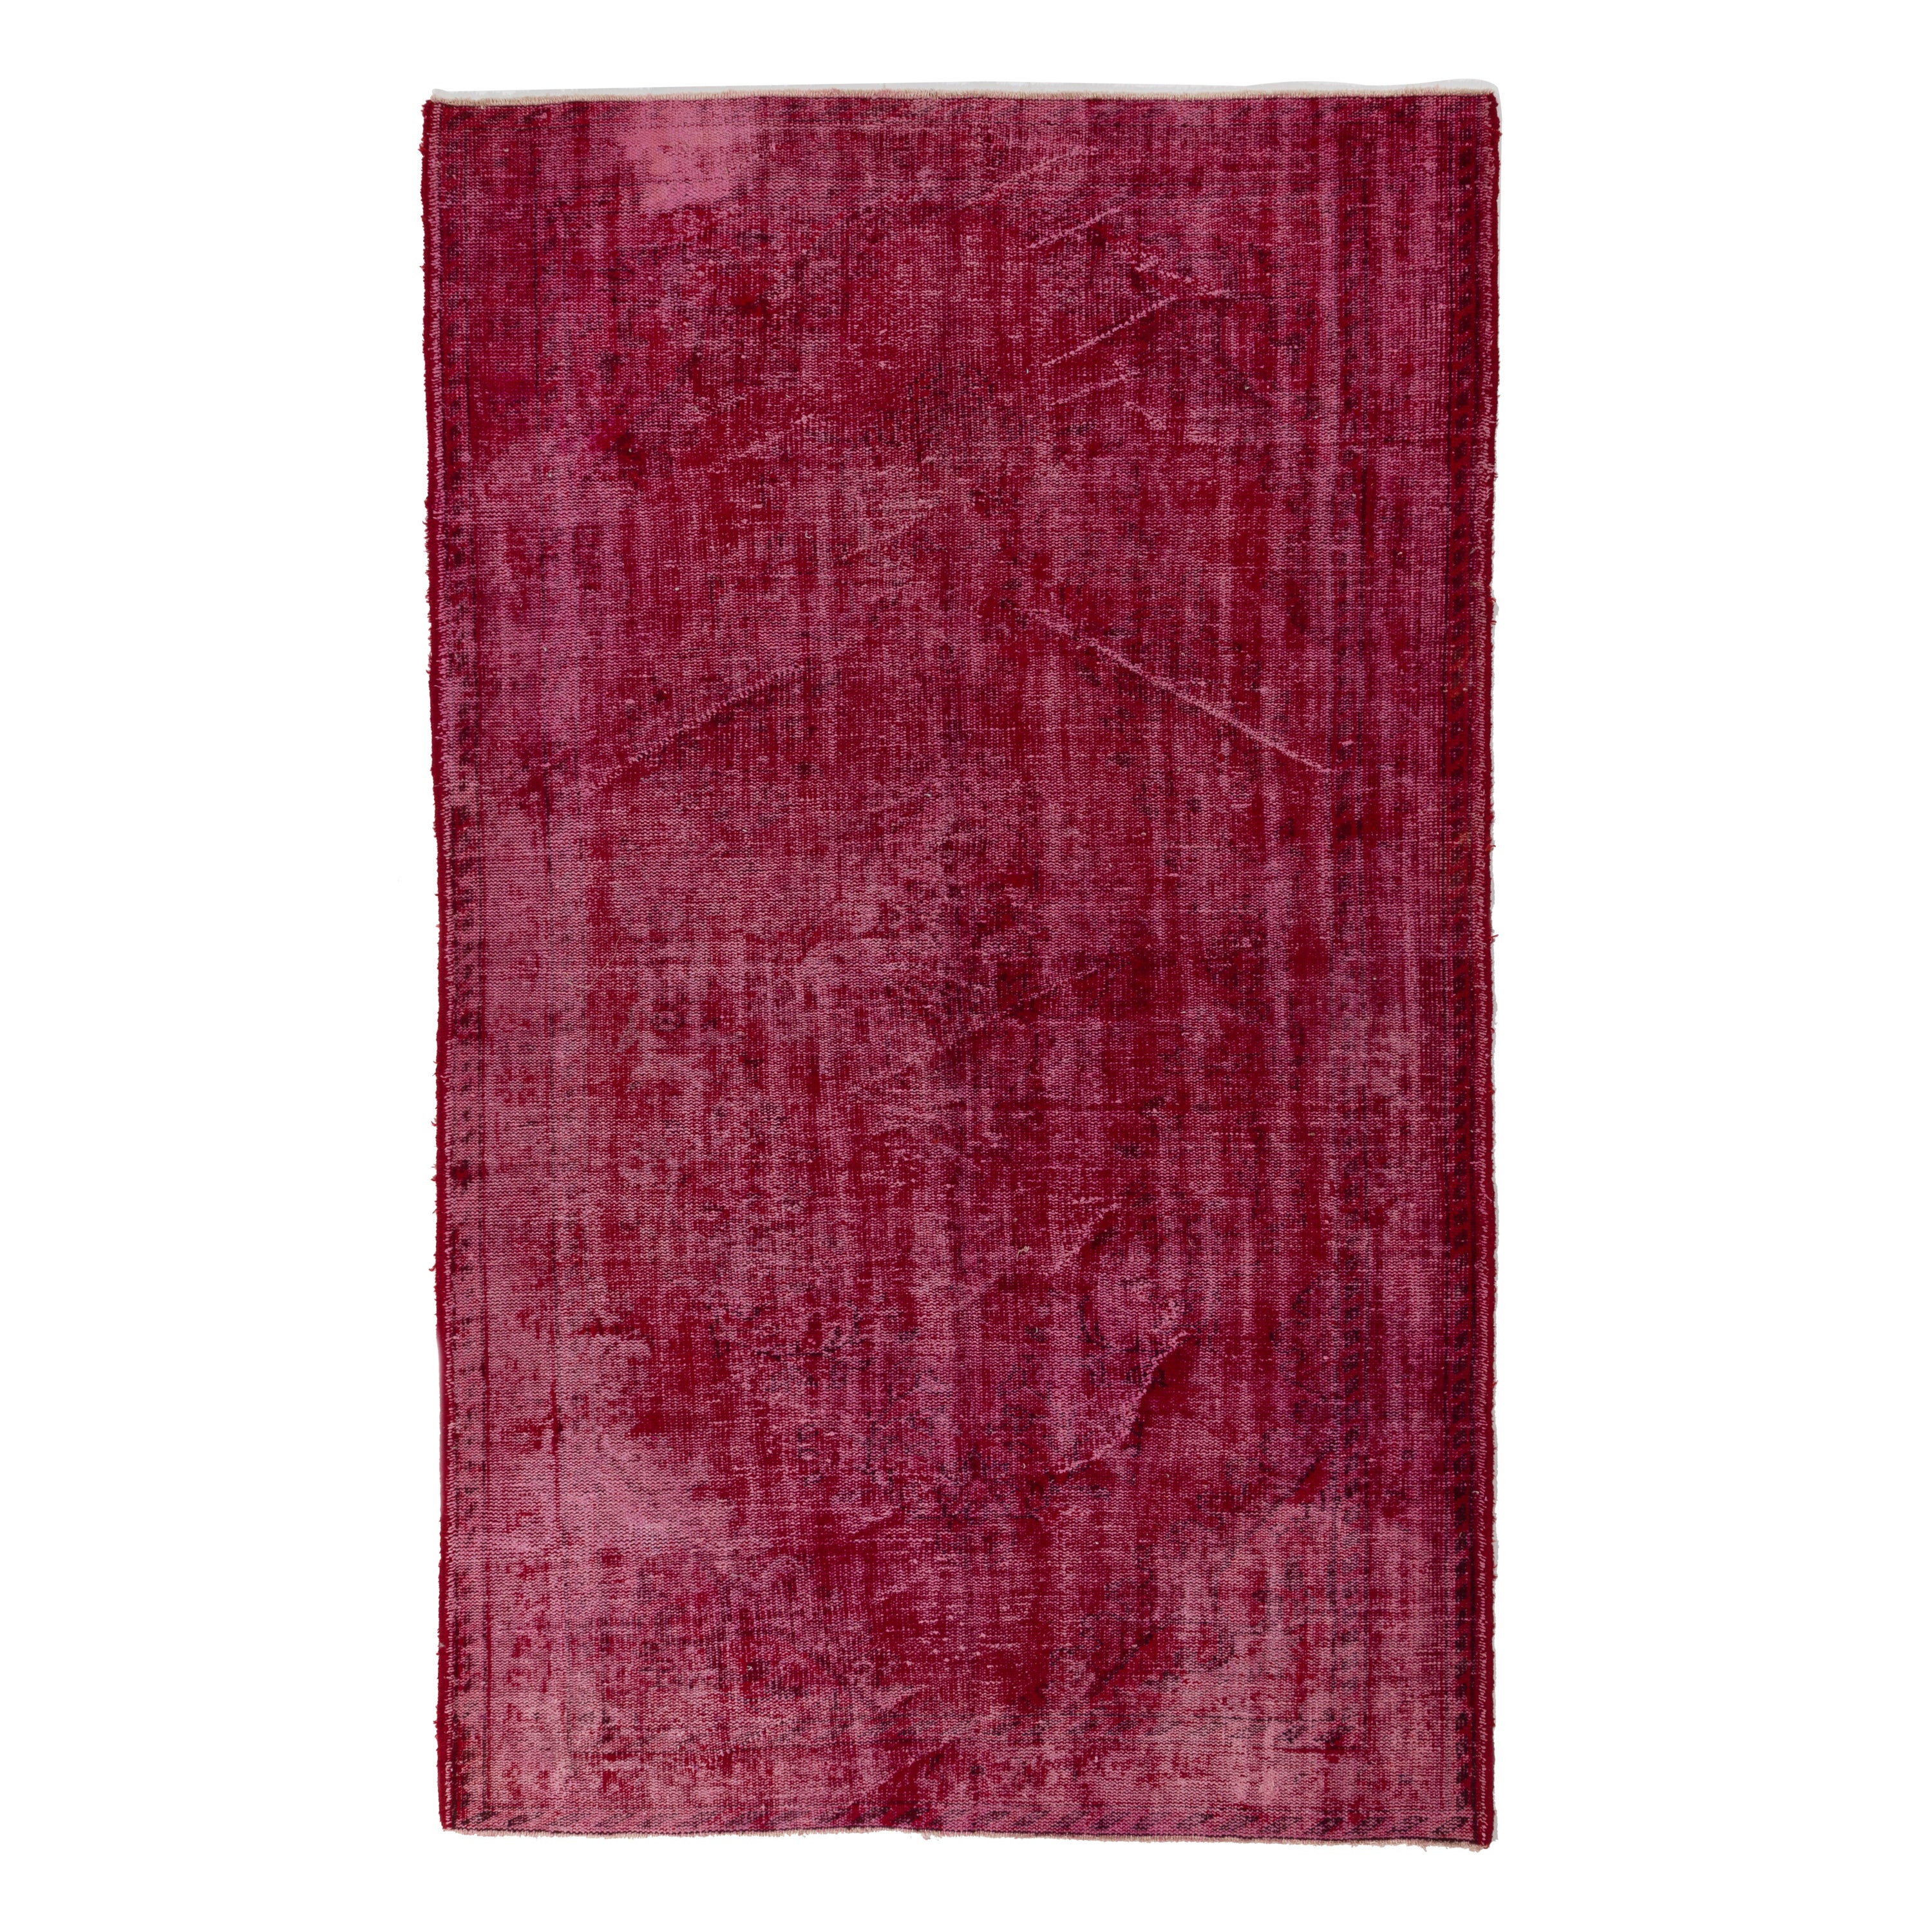 5.8x9.6 Ft Plain Solid Red Handmade Turkish Area Rug with Shabby Chic Style For Sale